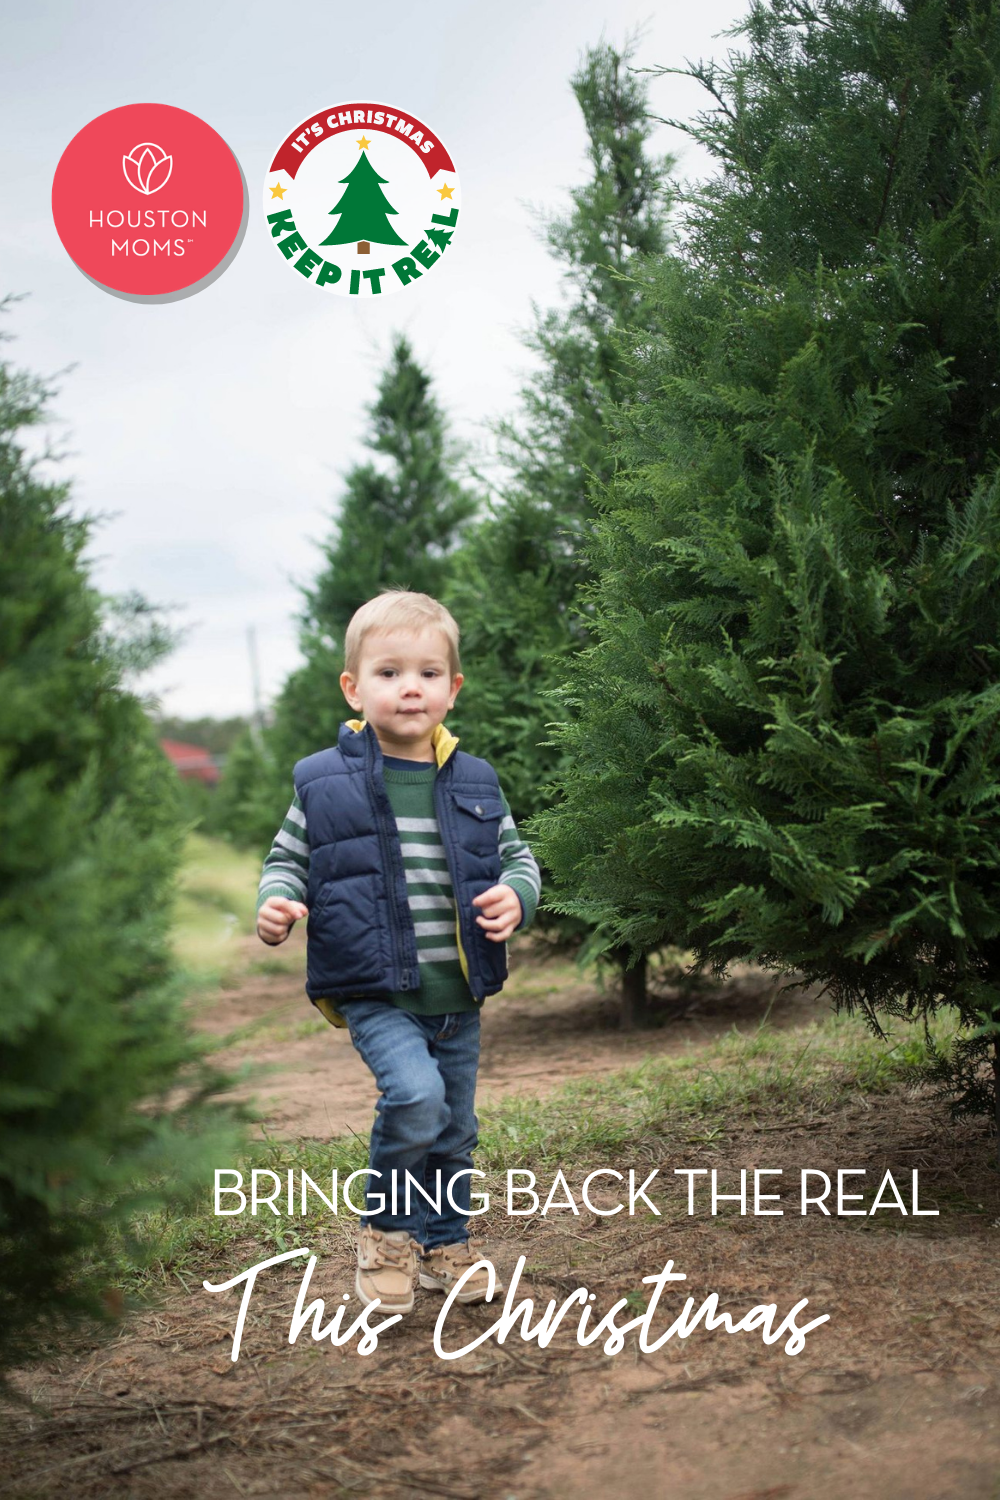 Houston Moms "Bringing Back the Real This Christmas" #houstonmoms #houstonmomsblog #momsaroundhouston